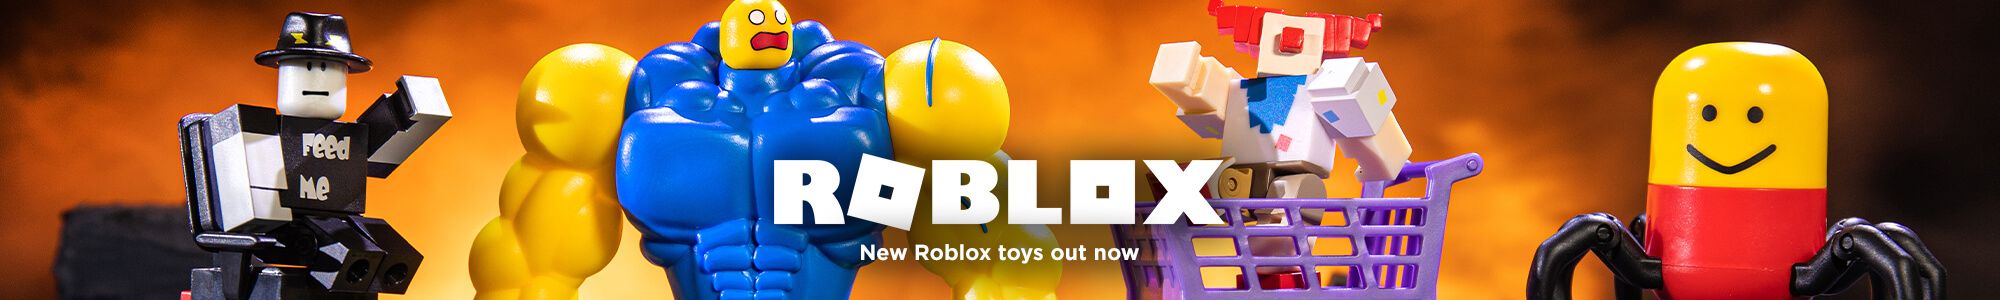 Roblox Roblox Toys Figures The Entertainer - island royale team finder roblox